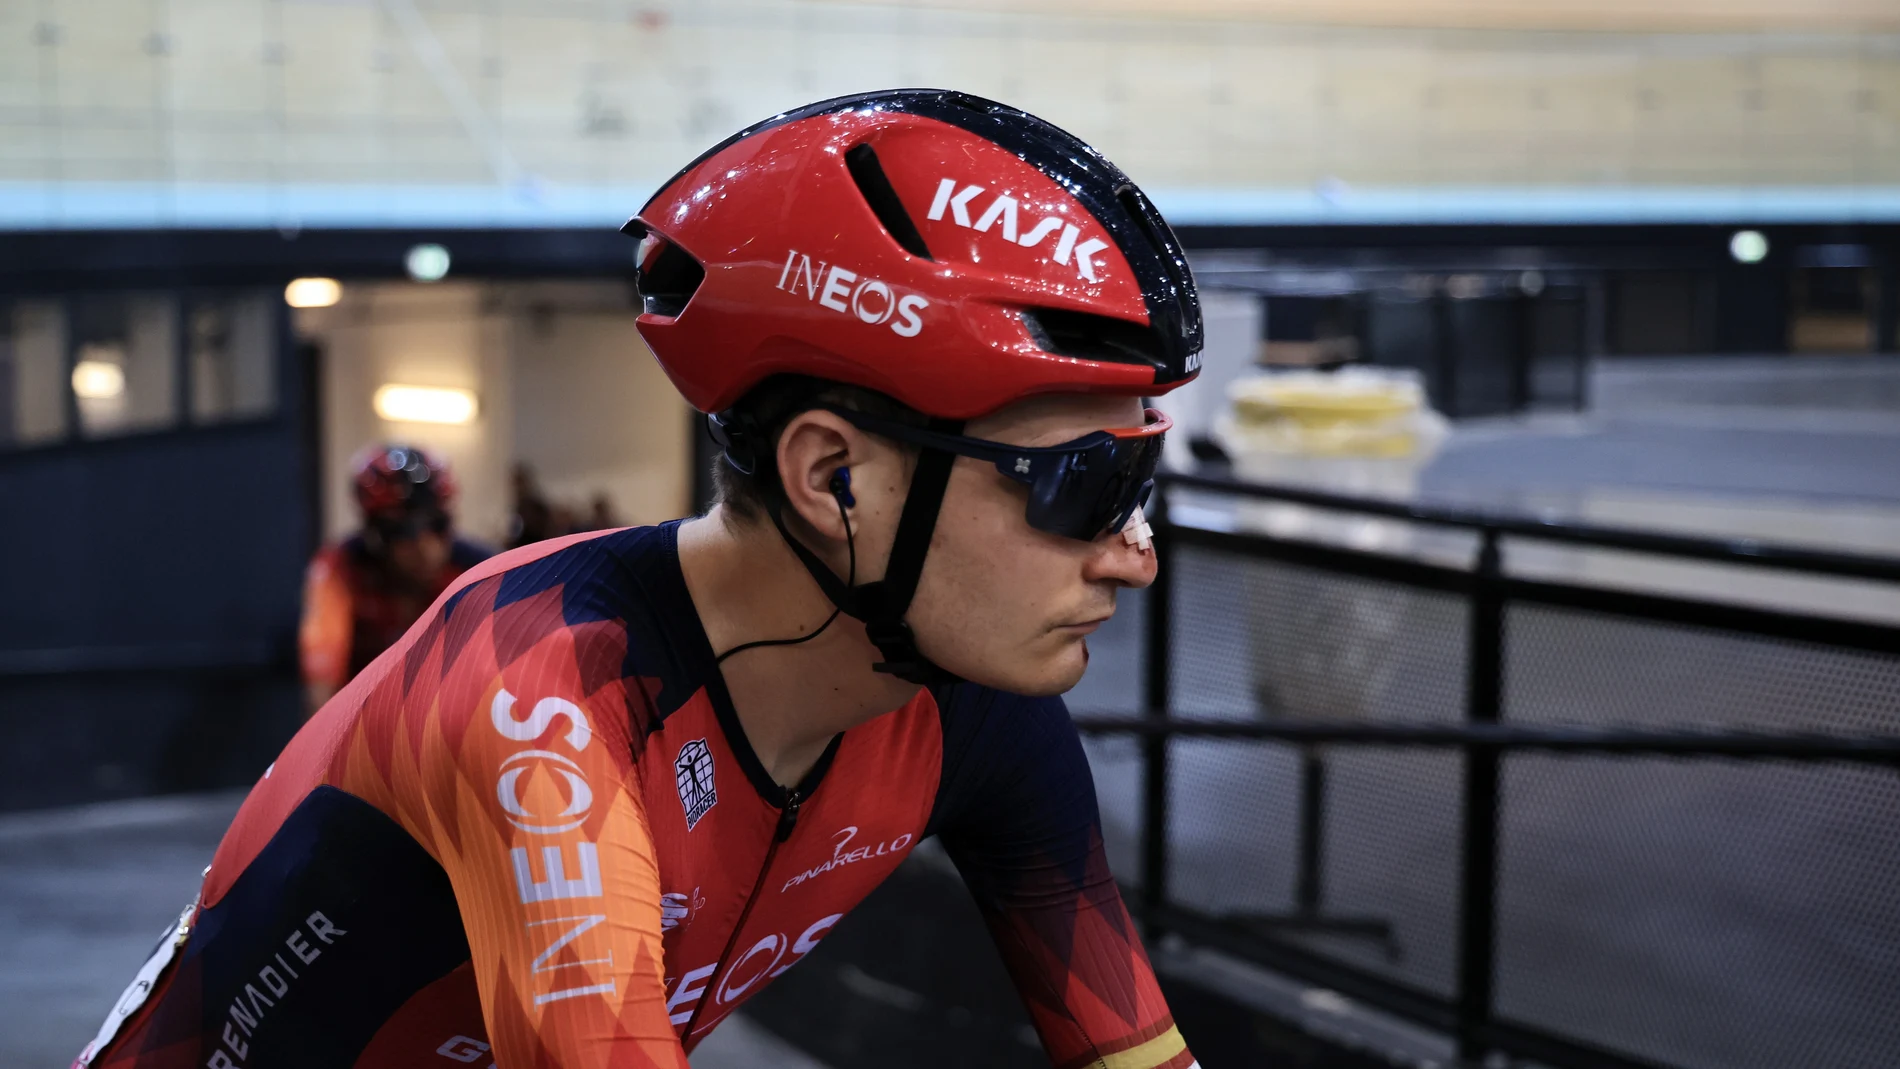 Spanish rider Carlos Rodriguez of team INEOS Grenadiers at the Velodrome National de Saint-Quentin-en-Yvelines before the start of the 21st and final stage of the Tour de France 2023 over 115kms from Saint-Quentin-en-Yvelines to Paris Champs-Elysee, France, 23 July 2023. (Ciclismo, Francia, Roma) 